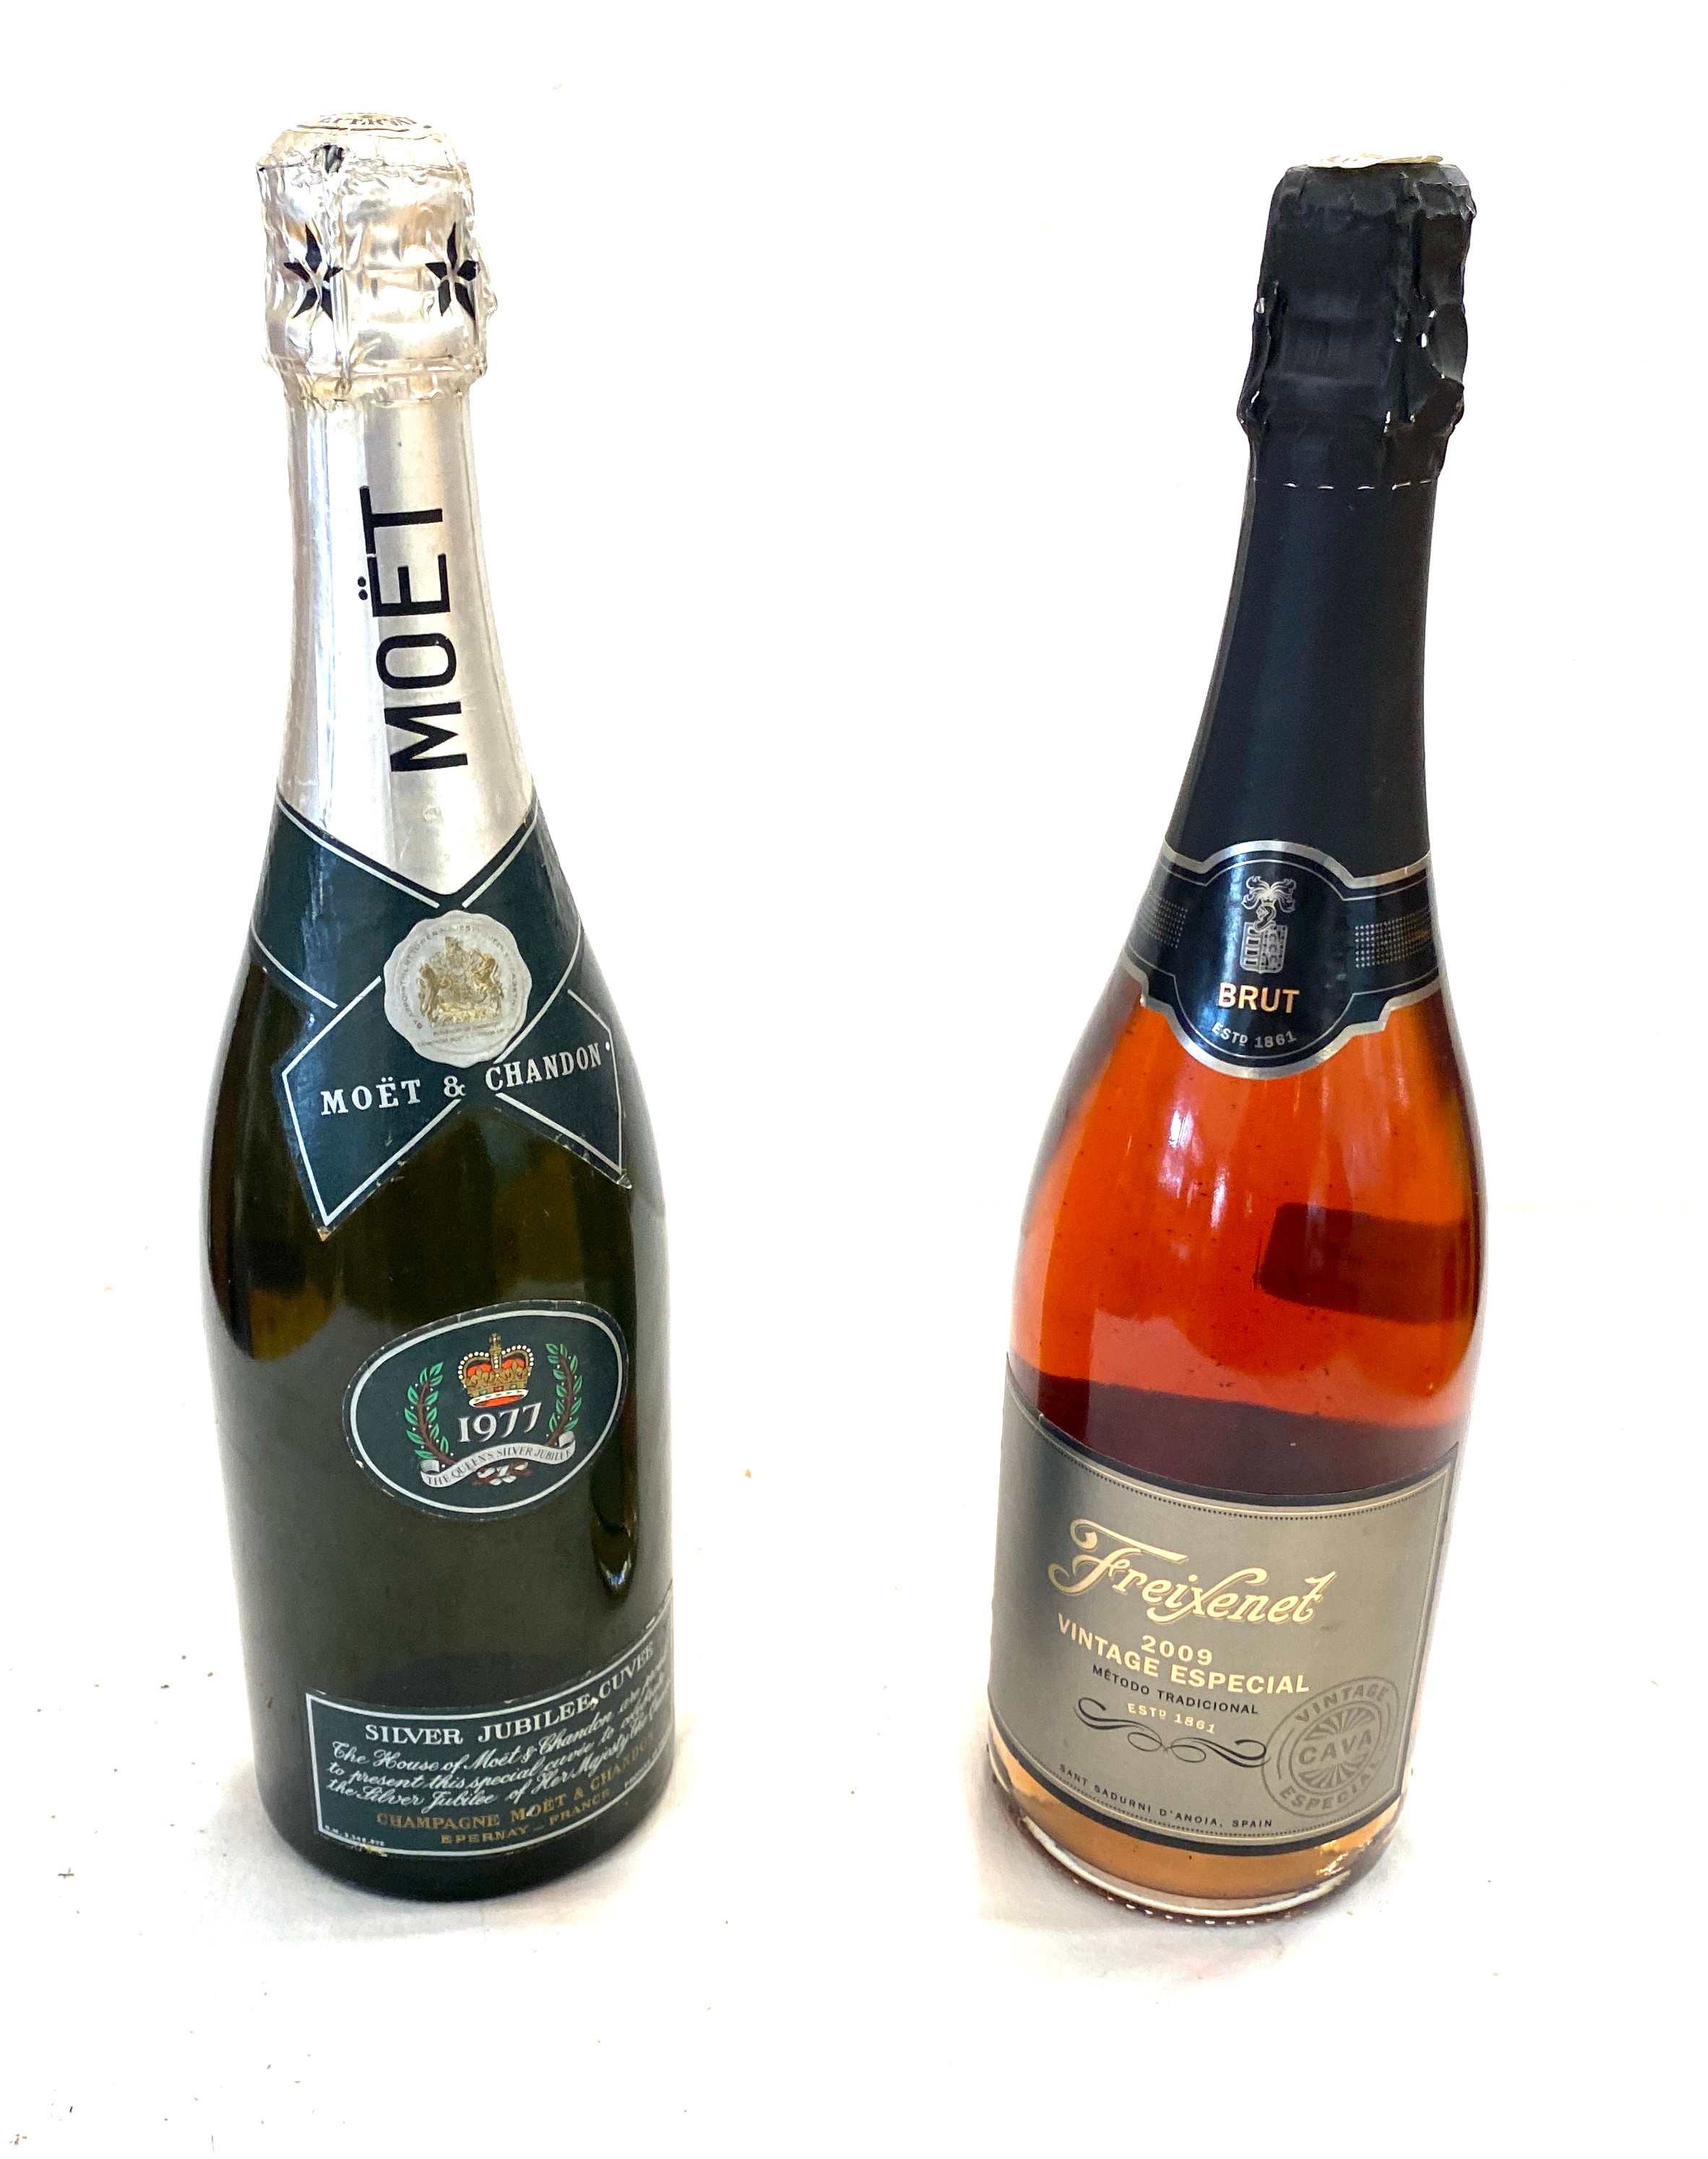 Bottle of sealed Moet and Chandon 1977, The queens silver jubille, Freixenet sealed bottle - Image 2 of 5